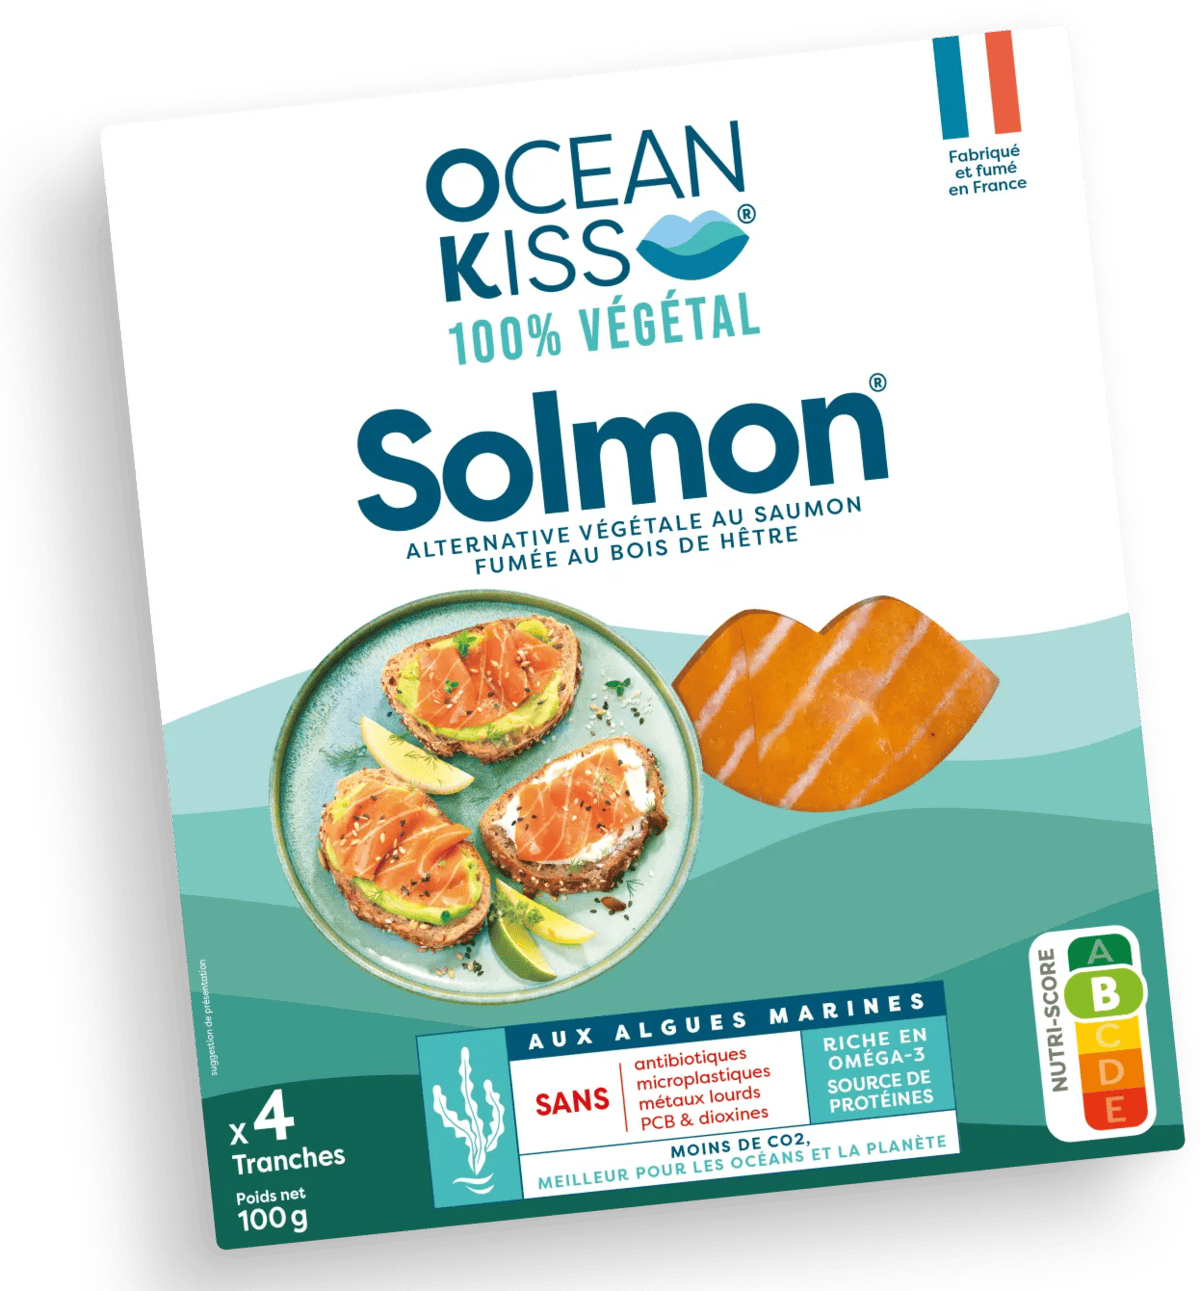 OCEAN KISS, a French startup based in Bordeaux, creates 100 % plant-based alternatives to ocean favorites.